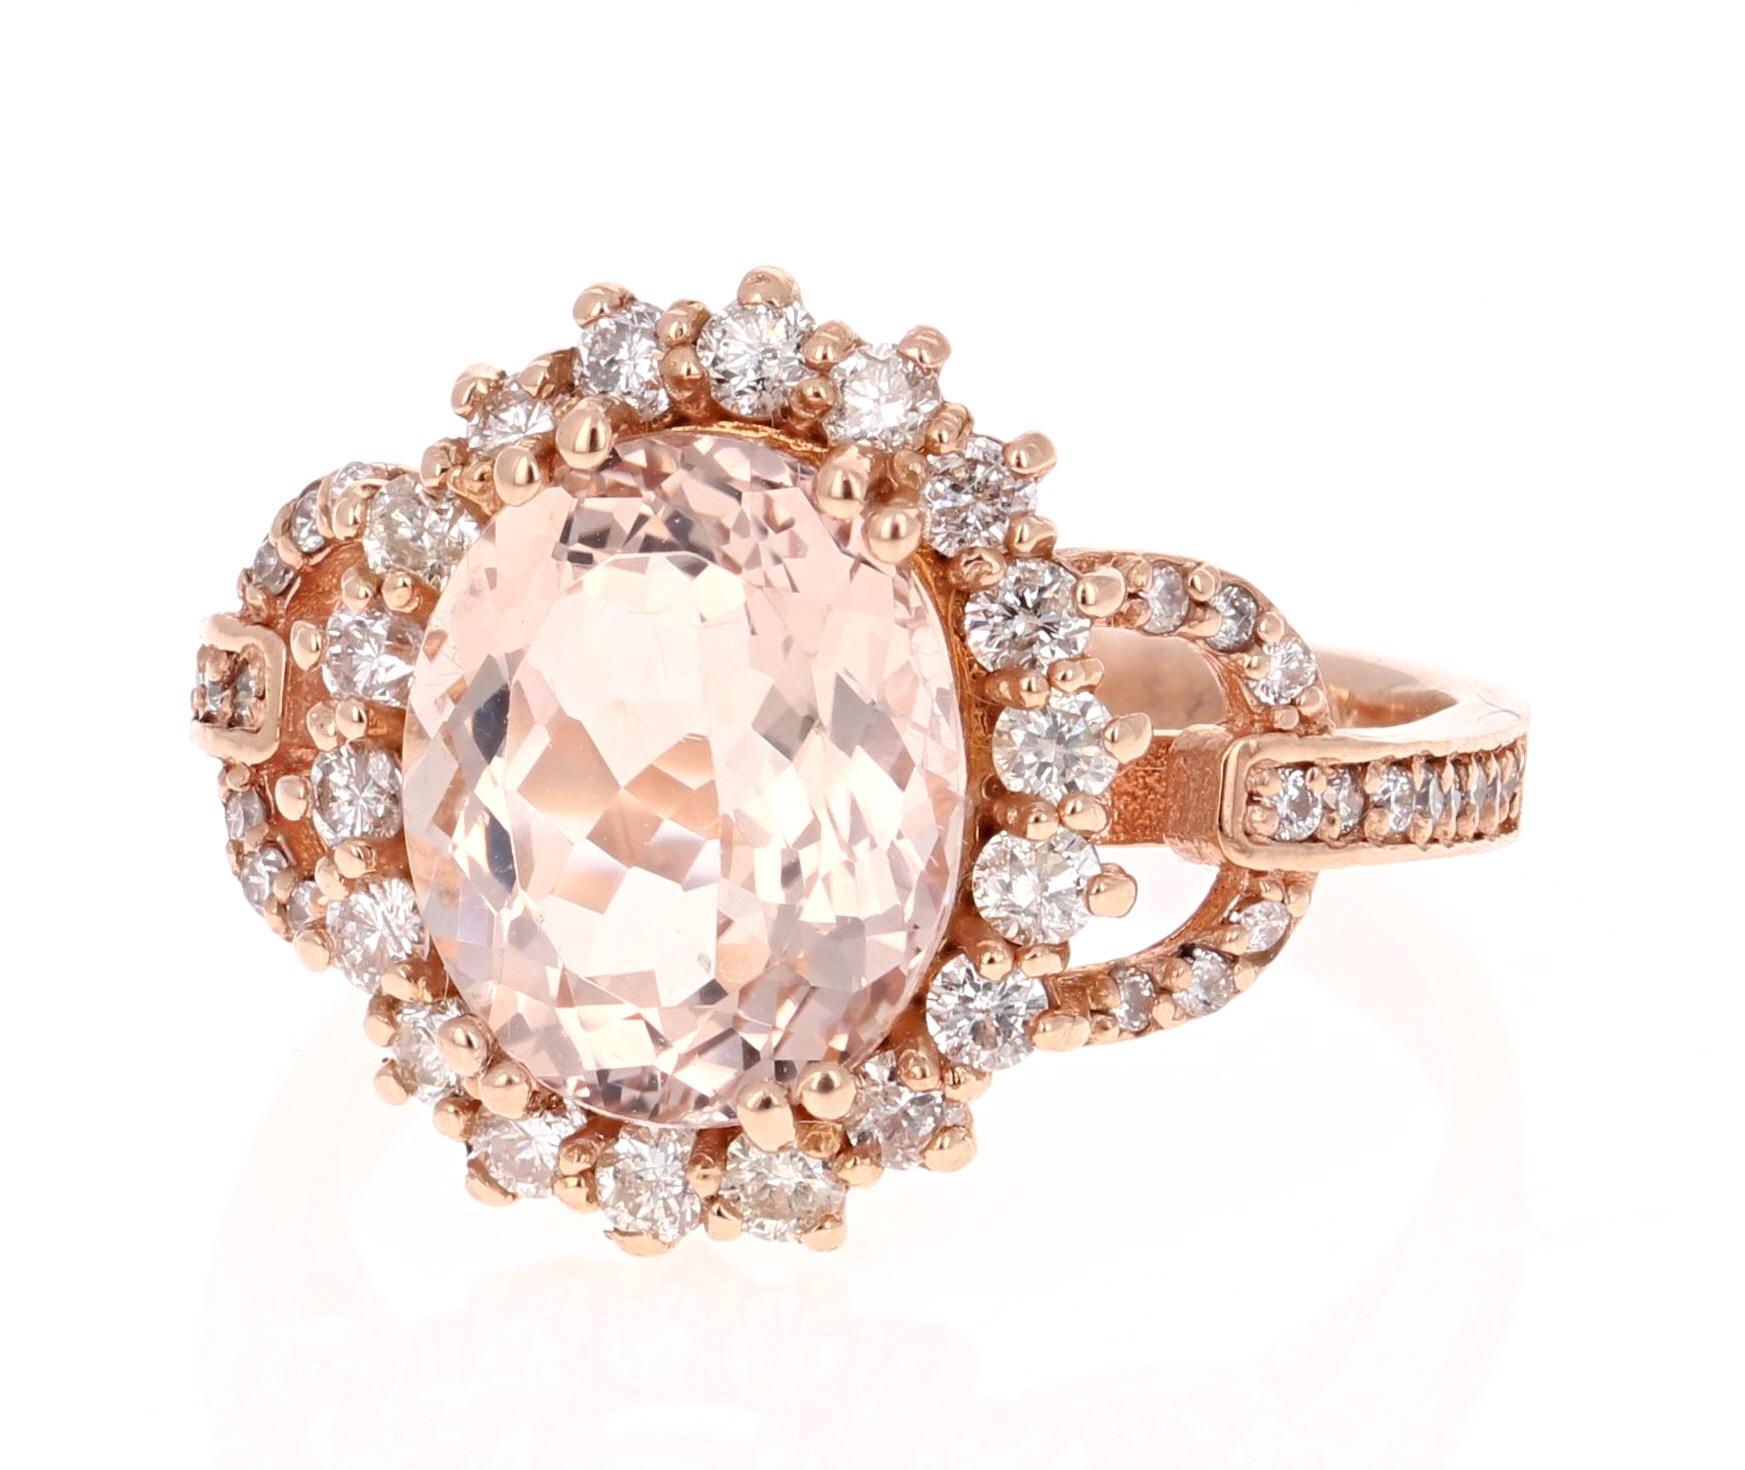 This gorgeous and classy Morganite Ring can easily substitute for a unique and edgy Engagement or Promise ring for that special someone.  

It has a 3.30 Carat Oval Cut Morganite as its center and is surrounded by a halo of 46 Round Cut Diamonds